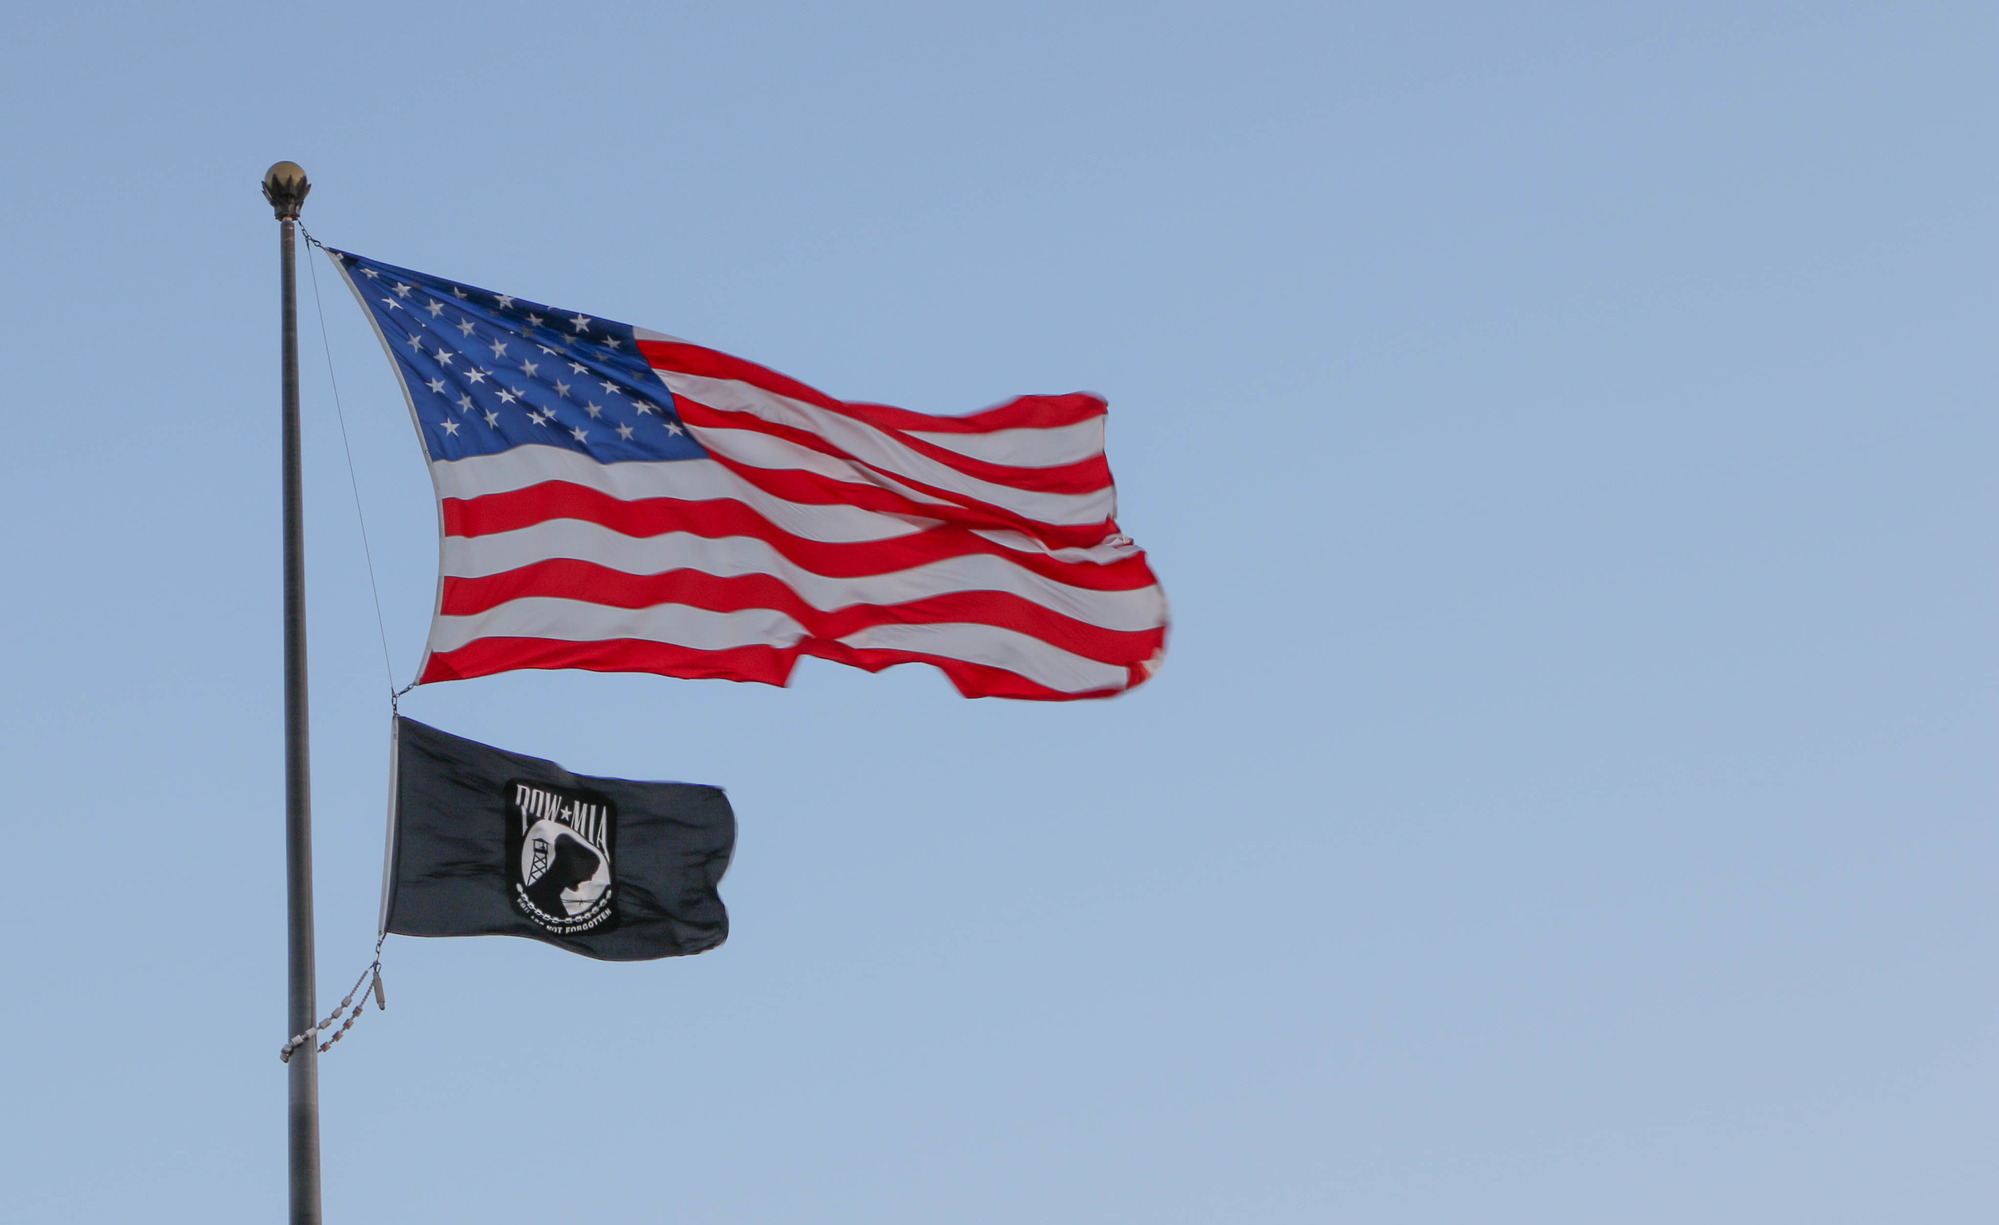 U.S. flag and P.O.W. flag flying in the wind